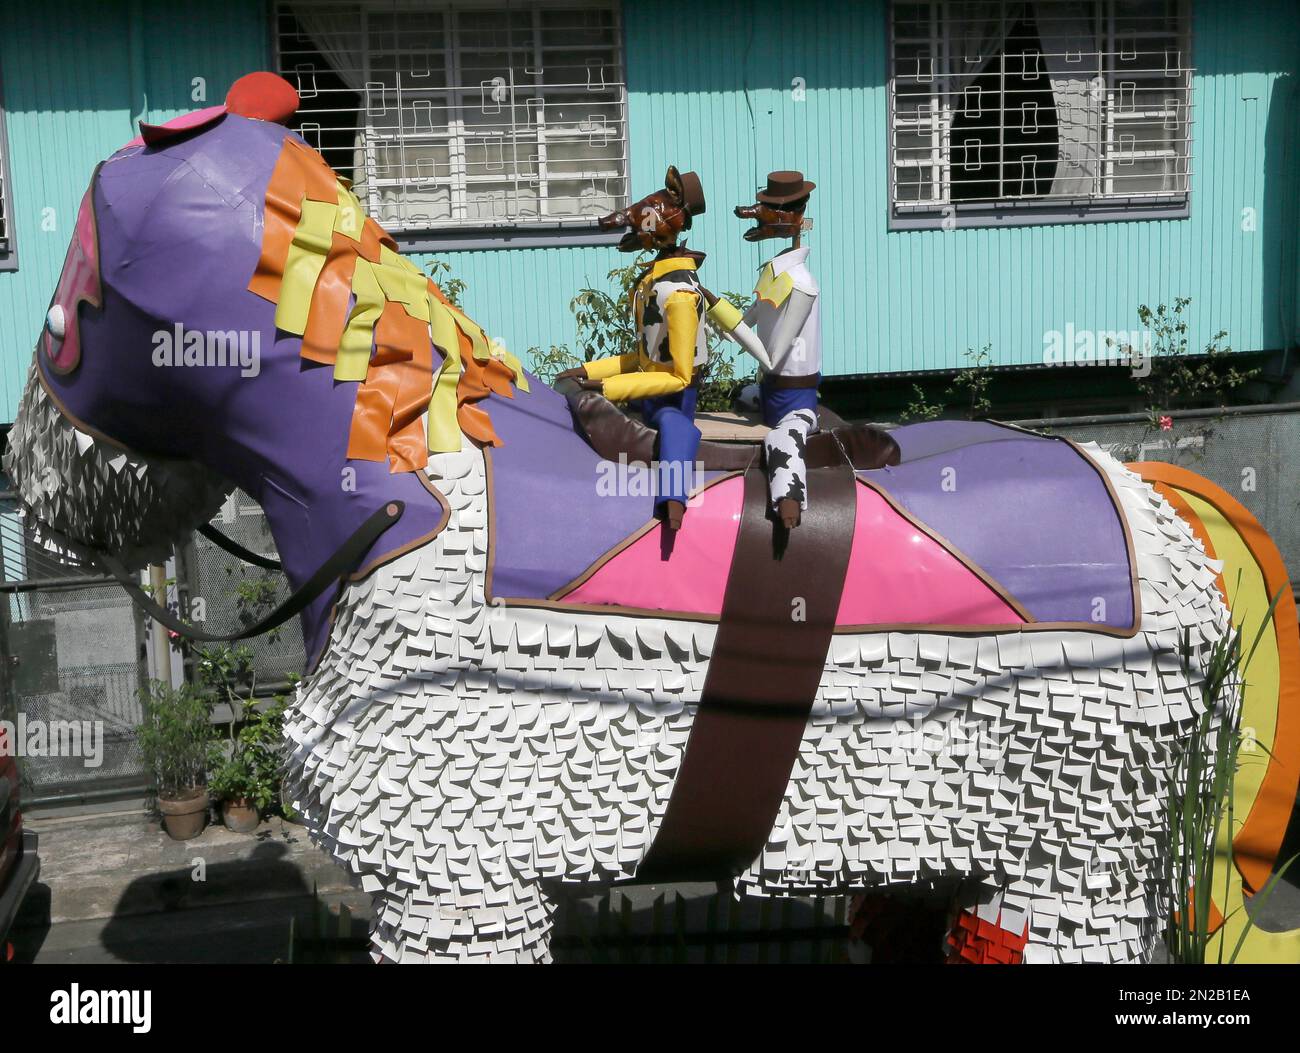 A float with roast pigs dressed as characters of a popular computer  animated film is paraded through the streets of La Loma district in Quezon  city to celebrate the annual 